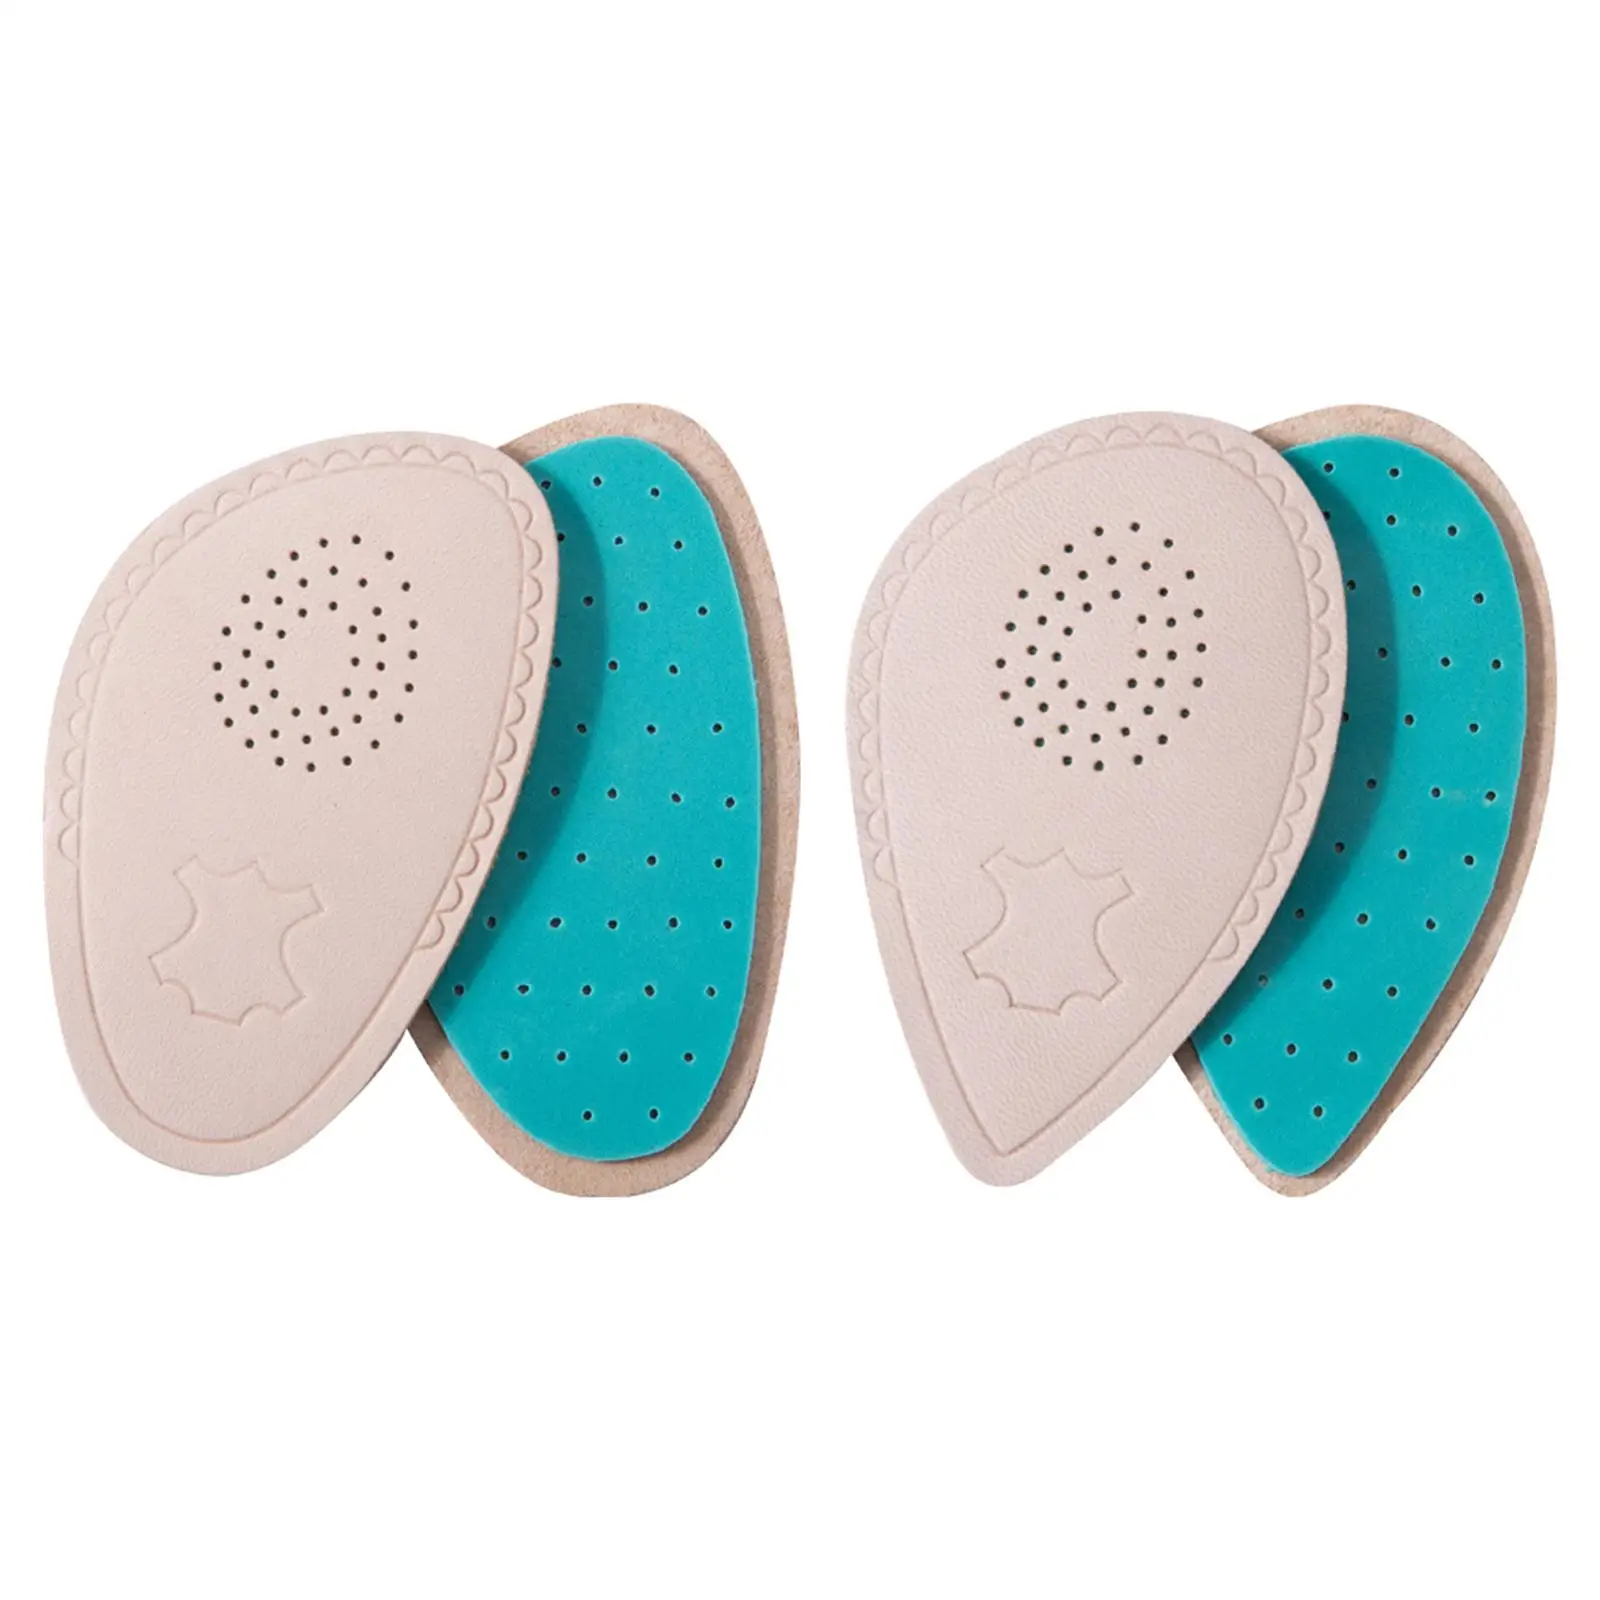 2 Pieces Metatarsal Pads, High  Inserts Comfortable Non , Breathable, Soft Absorb Sweat, Relieve  Forefoot Cushion Unisex